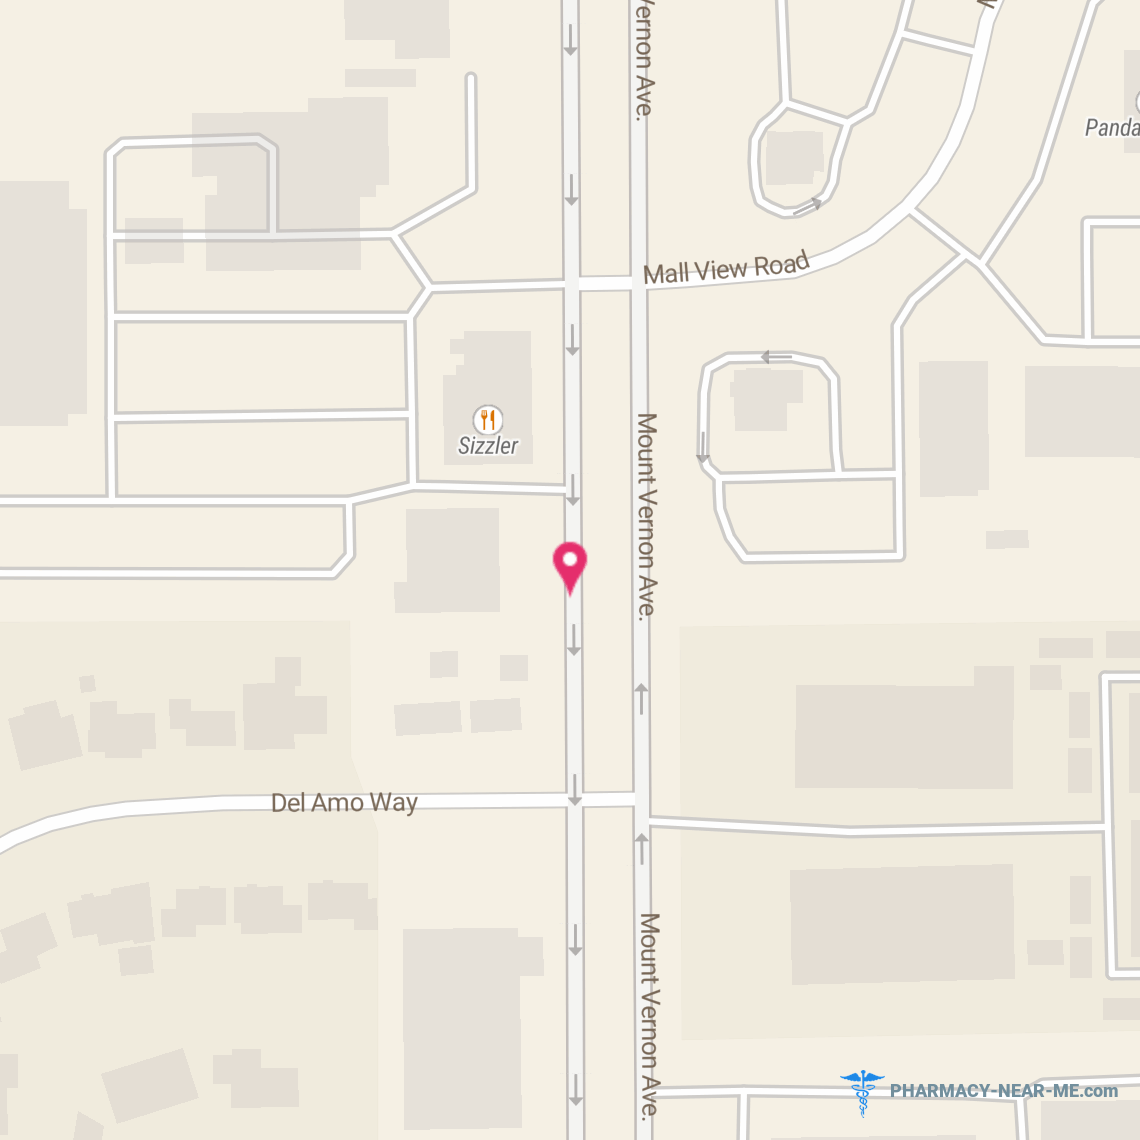 RITE AID PHARMACY 05814 - Pharmacy Hours, Phone, Reviews & Information: 2505 Mount Vernon Avenue, Bakersfield, California 93306, United States